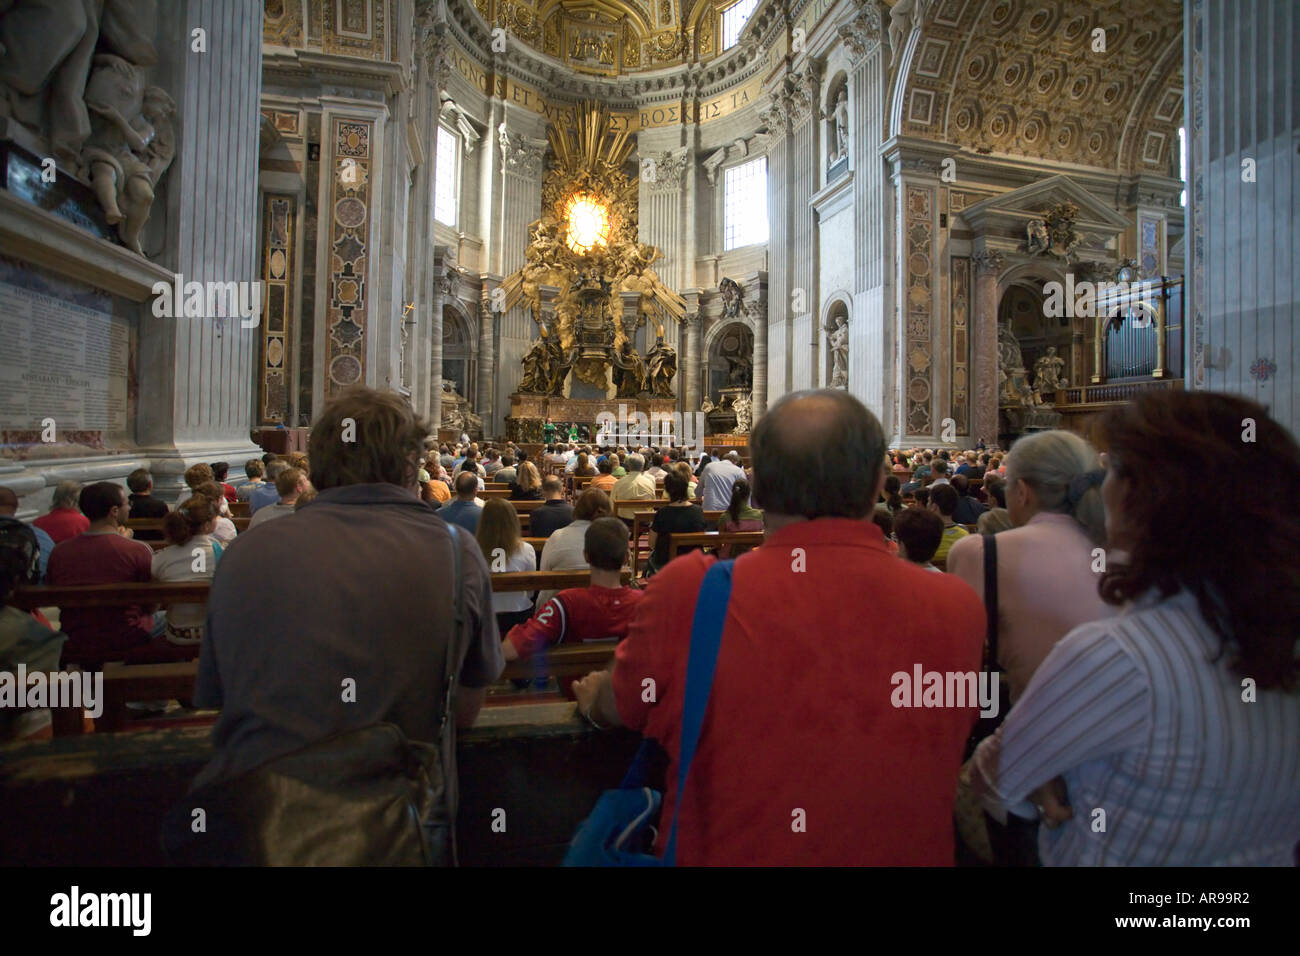 Mass in St Peters Church Rome Italy Stock Photo